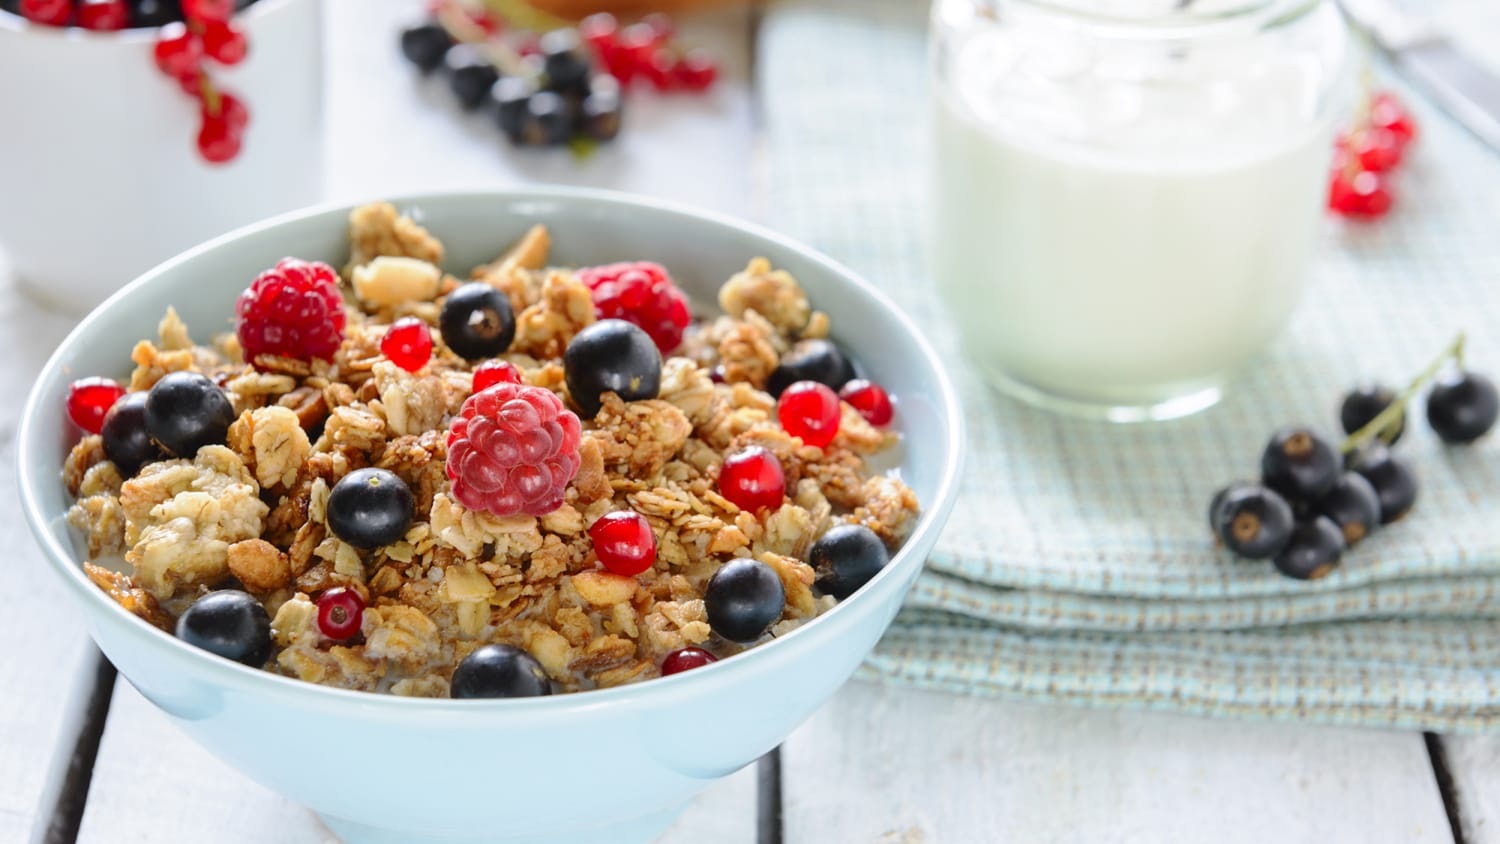 The healthiest breakfast cereals - what to look for